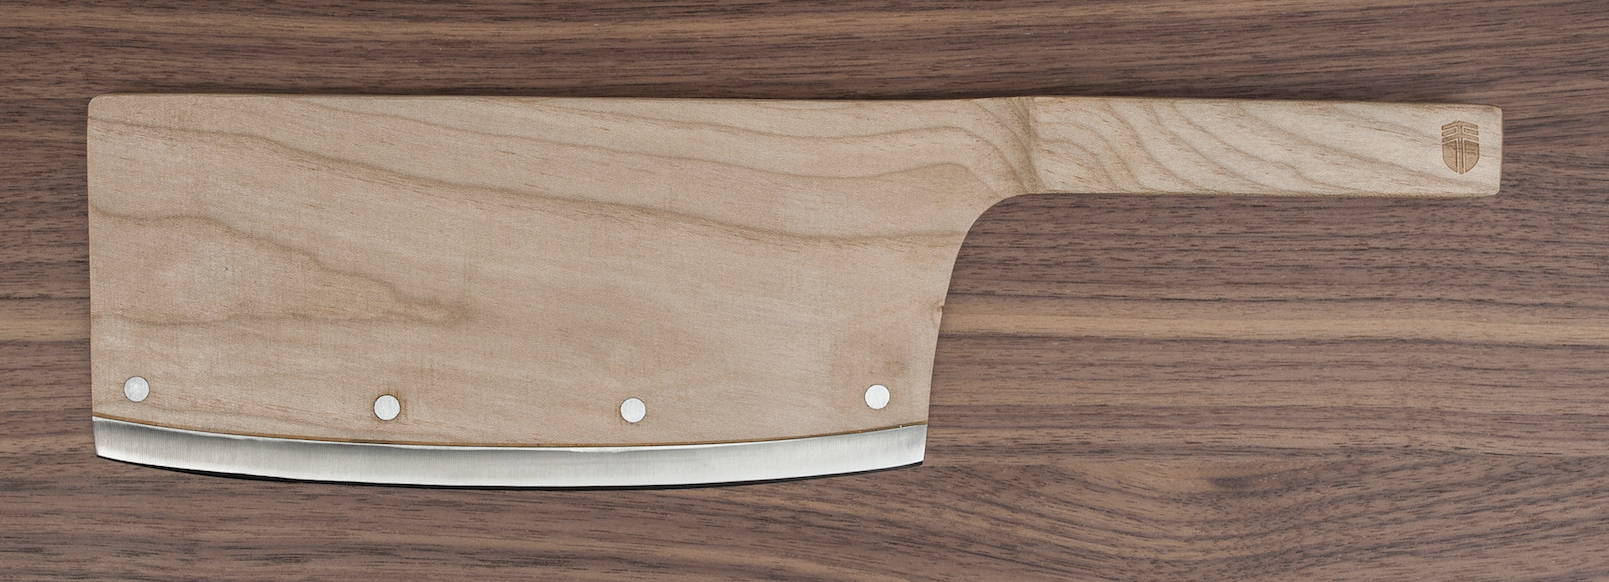 You Can Finally Buy Those Beautiful Wooden Kitchen Knives